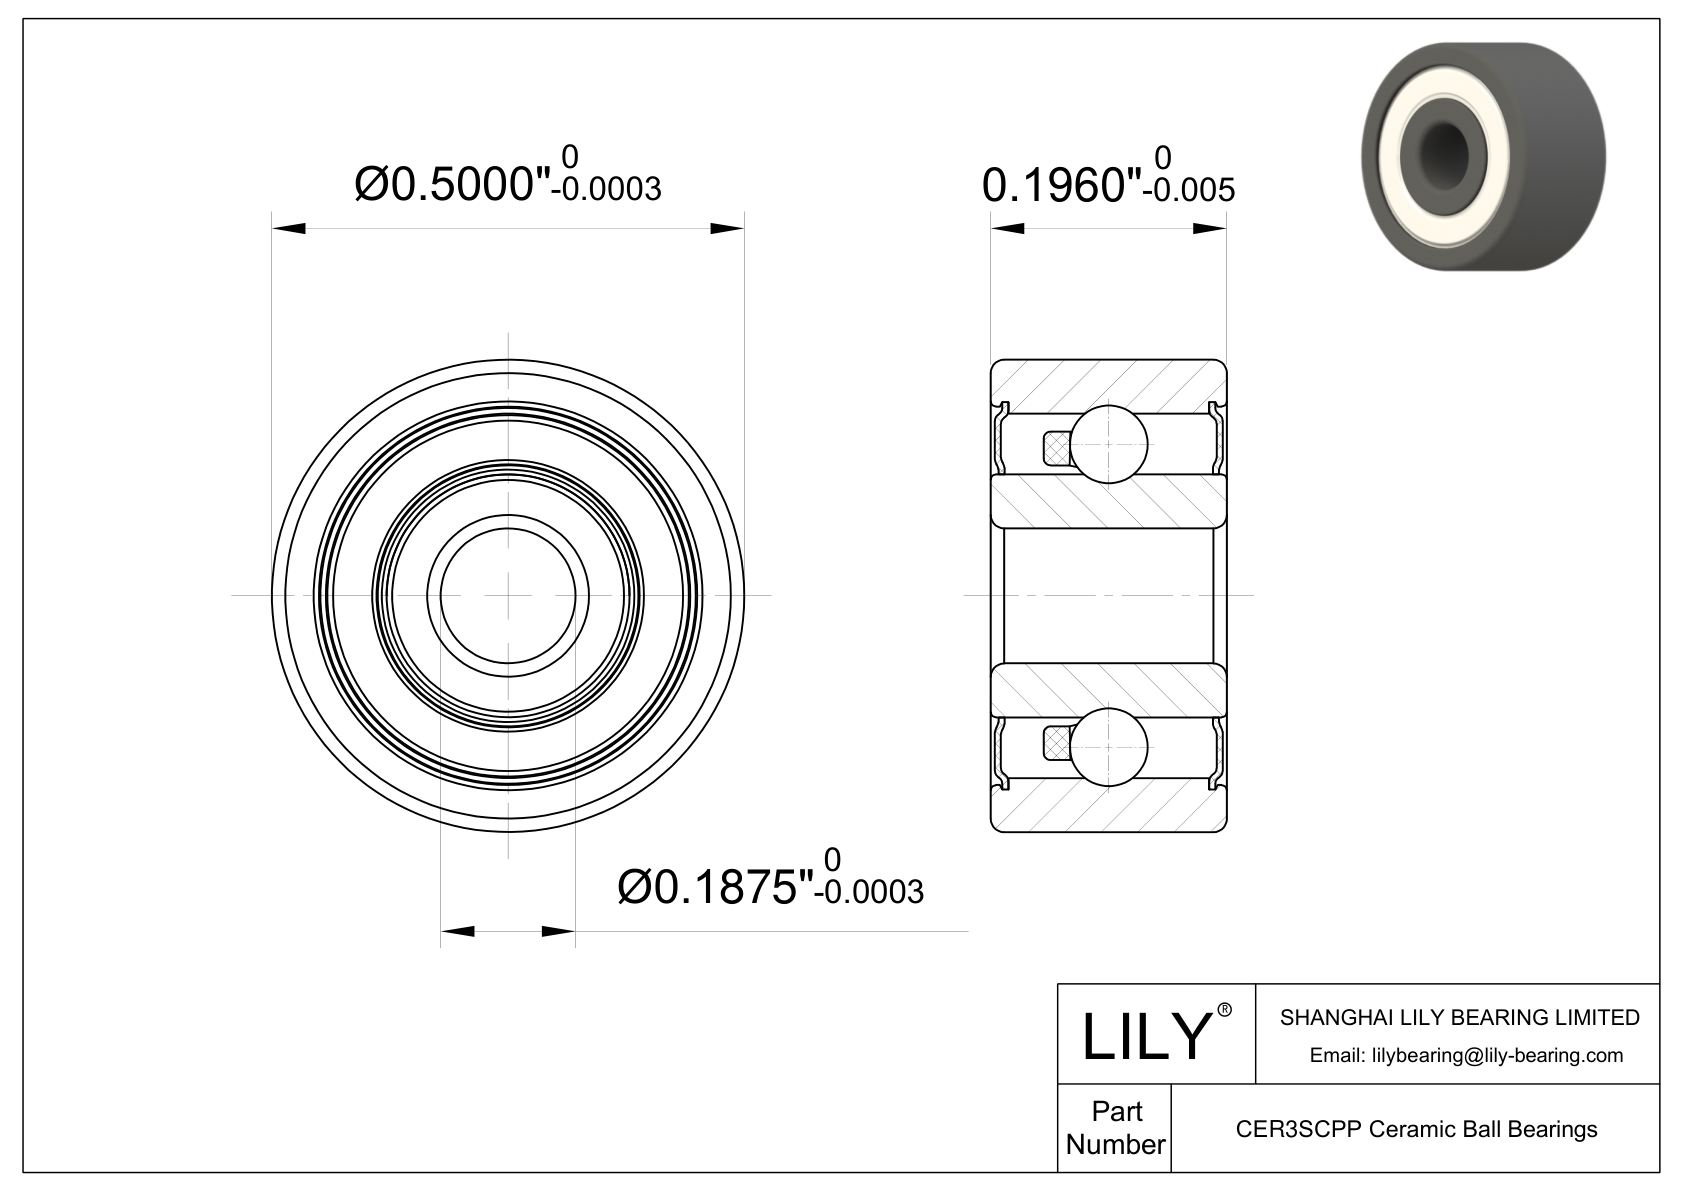 CESC R3 2RS Inch Size Silicon Carbide Ceramic Bearings cad drawing